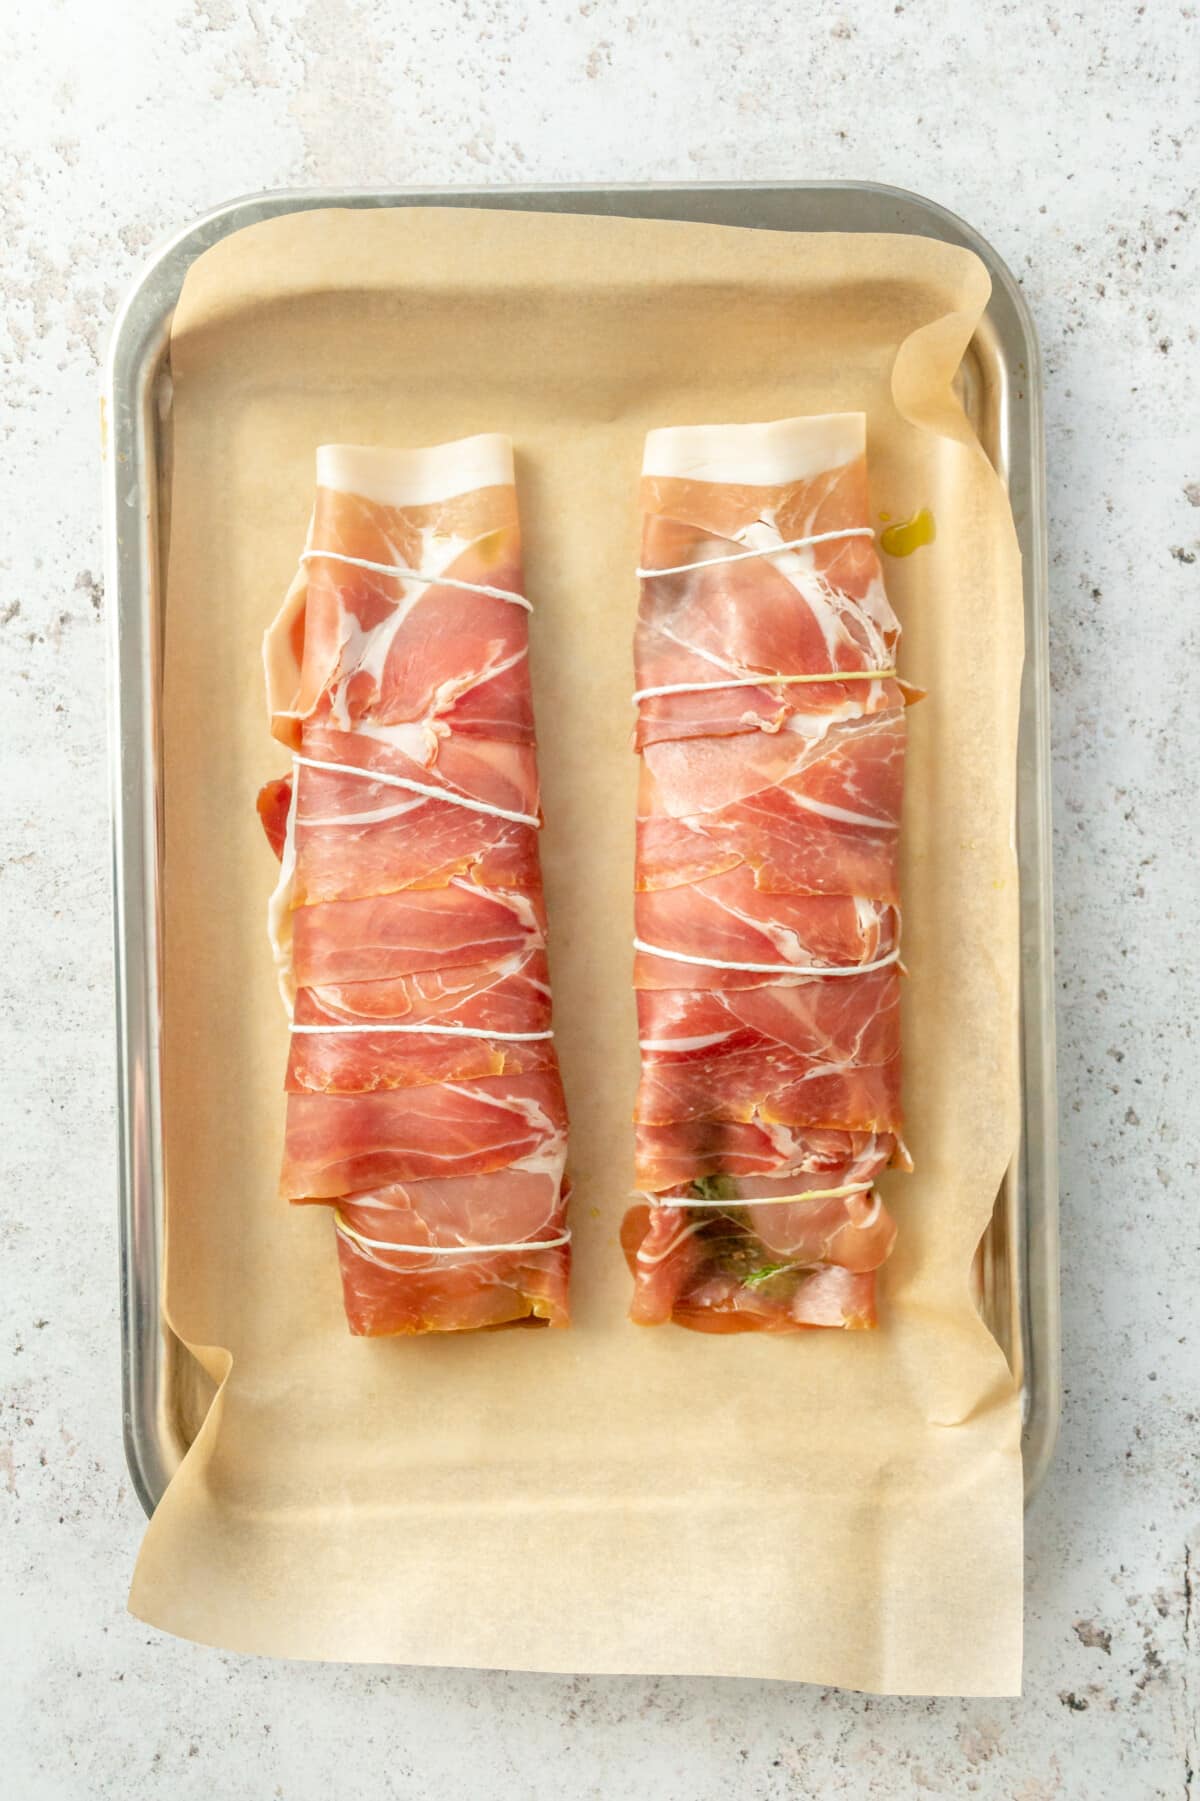 Prosciutto wrapped chicken breasts sit on a parchment lined baking sheet.